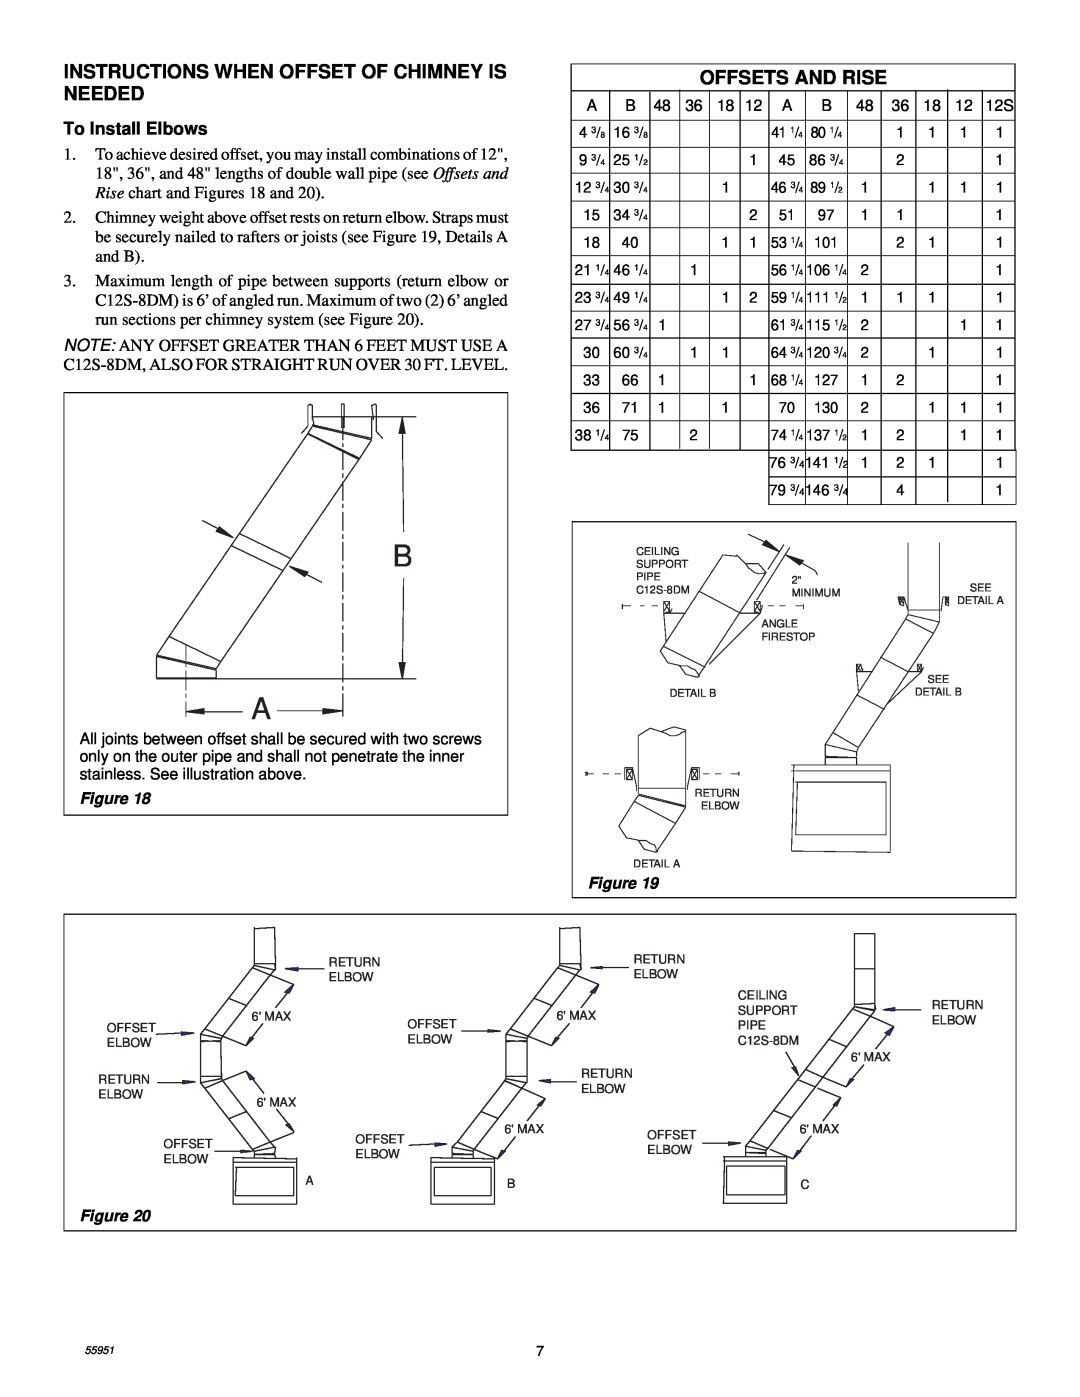 Desa C42EC2 installation instructions Instructions When Offset Of Chimney Is, Offsets And Rise, Needed 